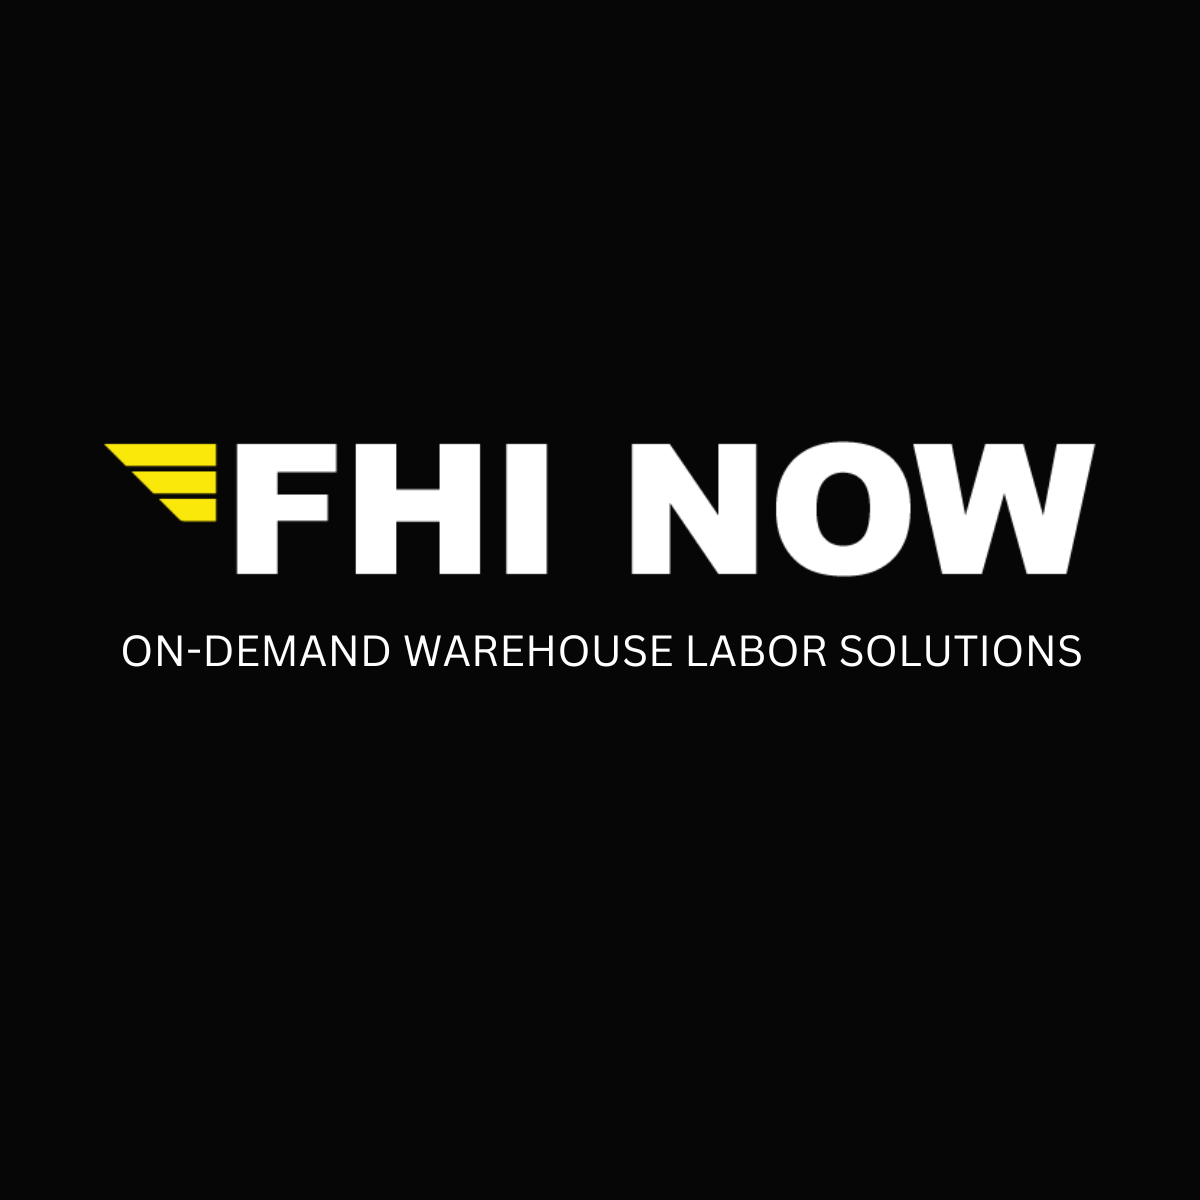 ON-DEMAND WAREHOUSE LABOR SOLUTIONS